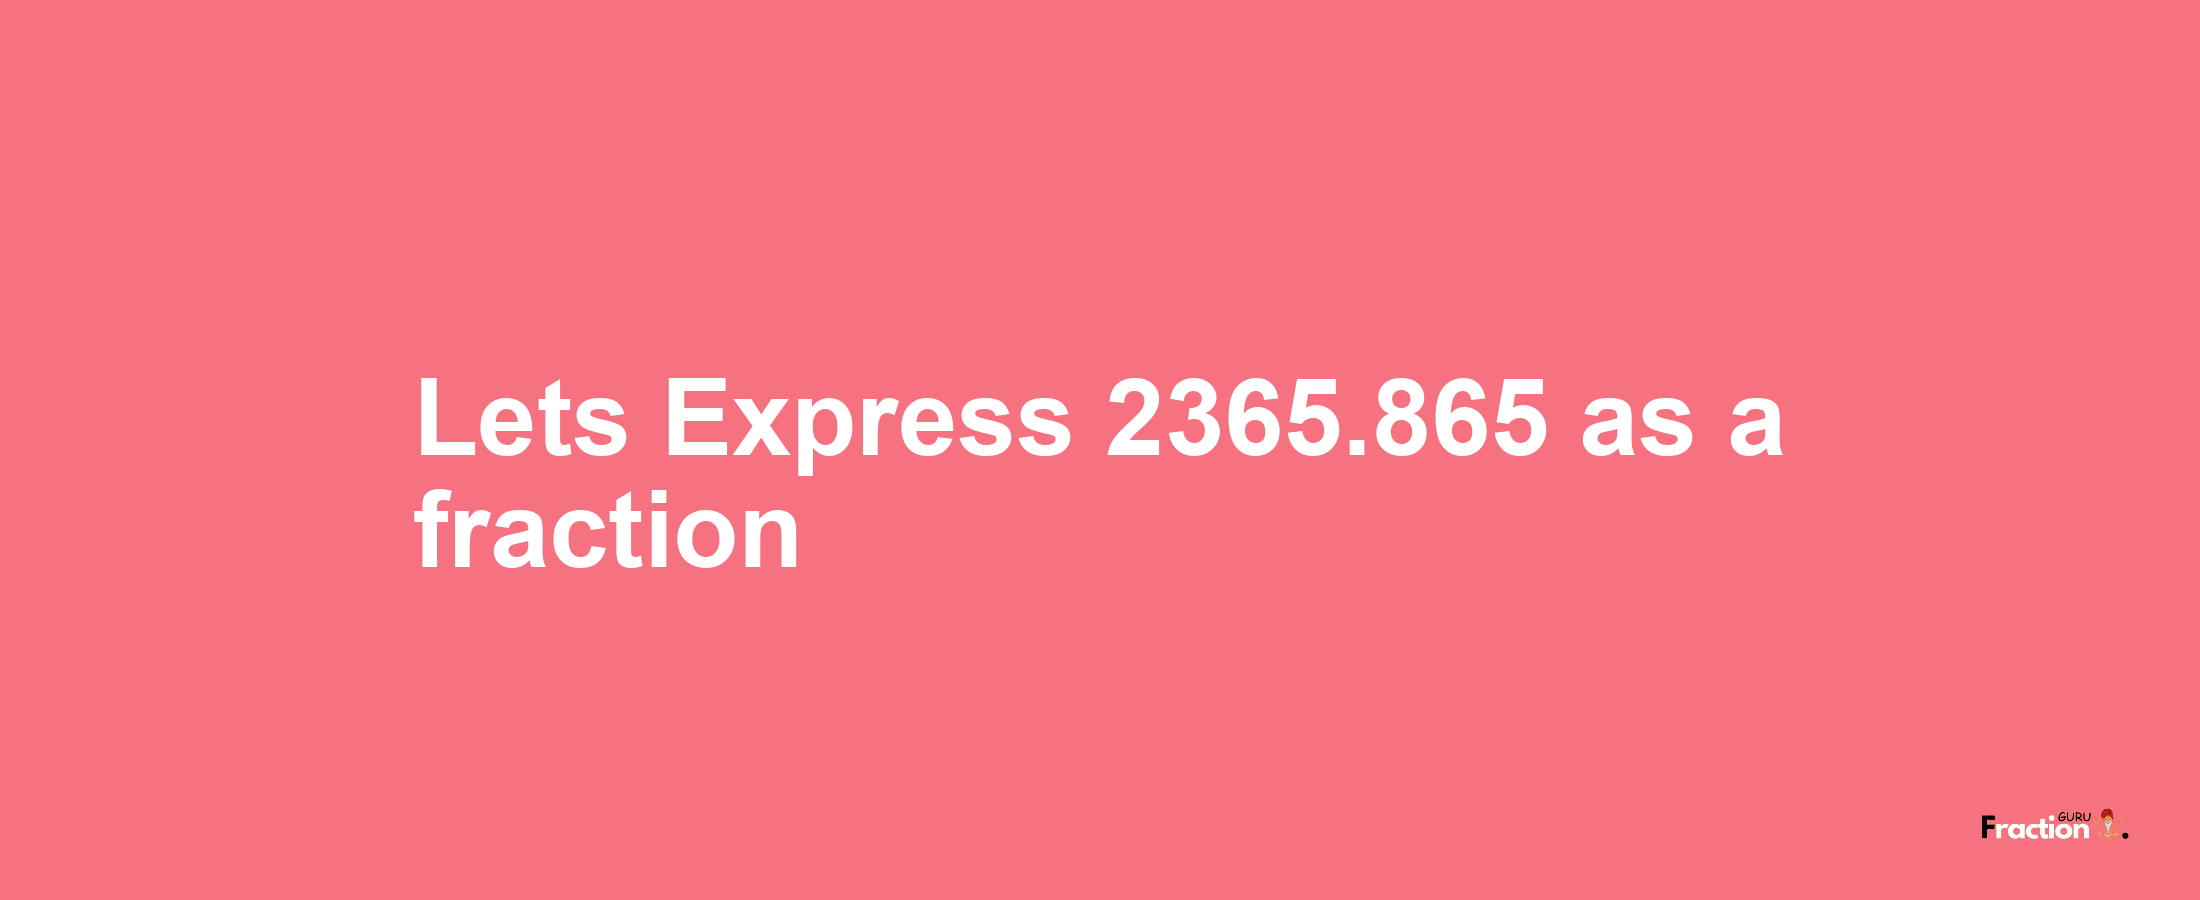 Lets Express 2365.865 as afraction